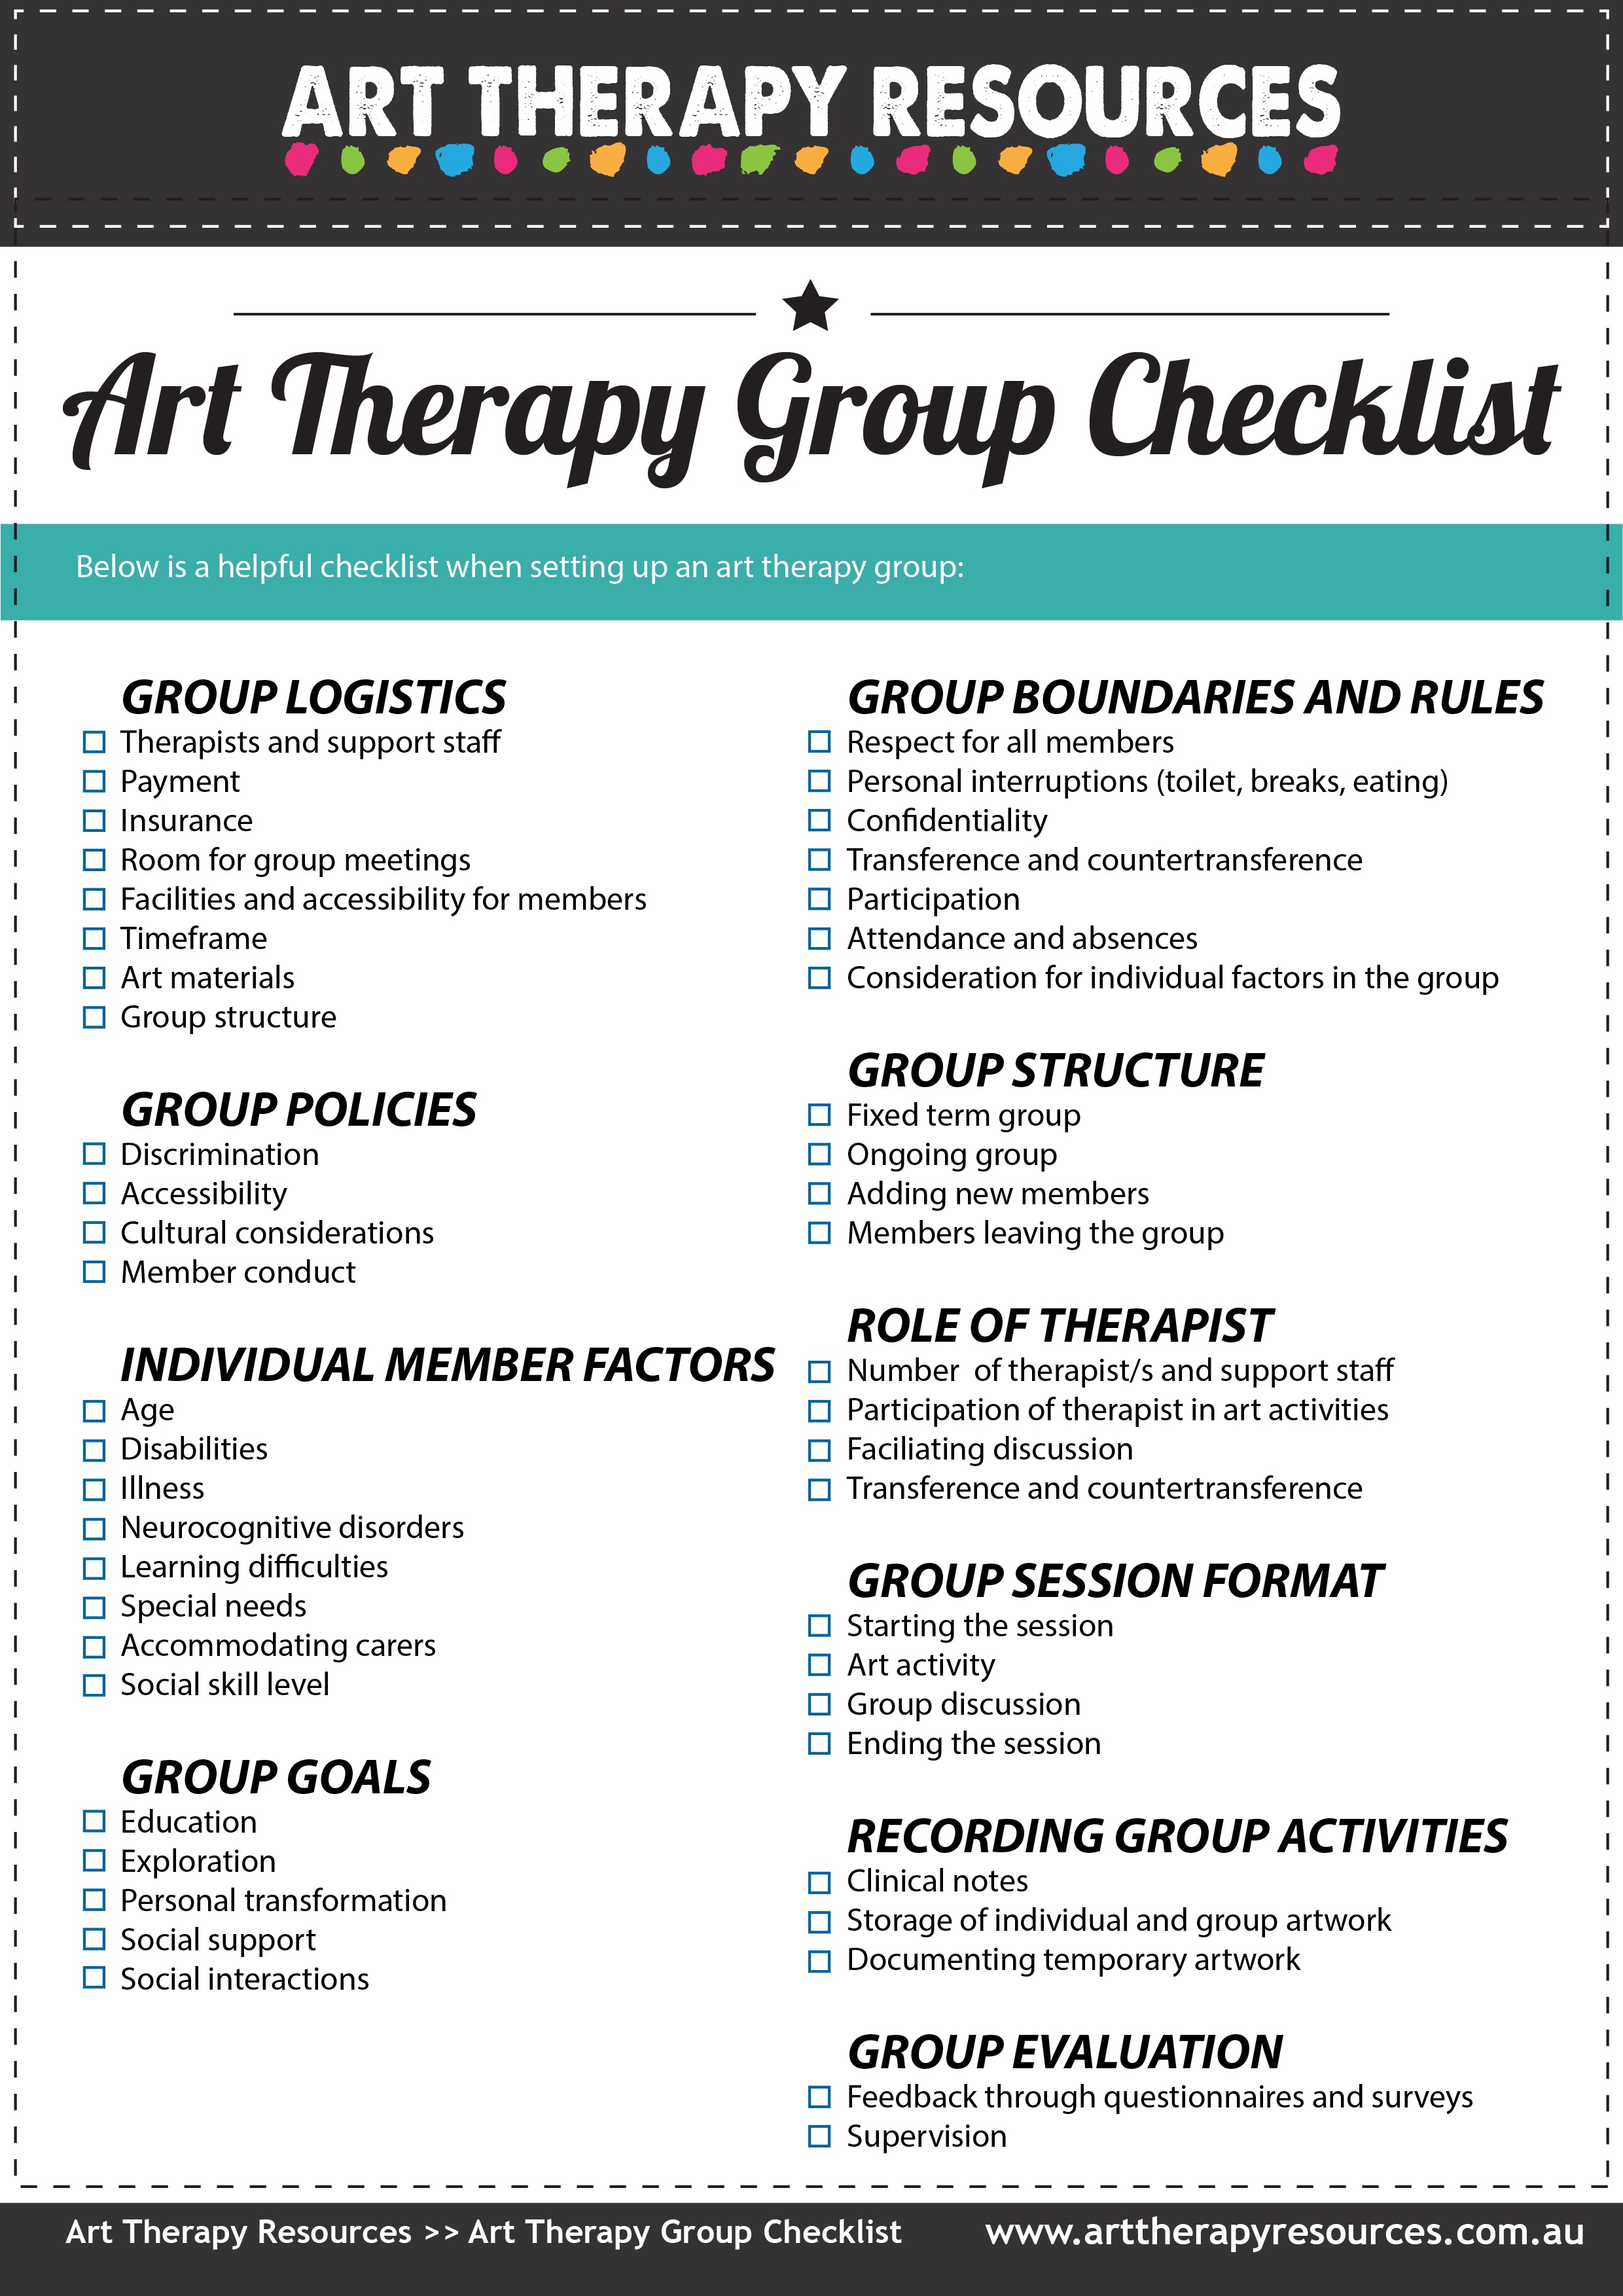 Art Therapy Group Checklist